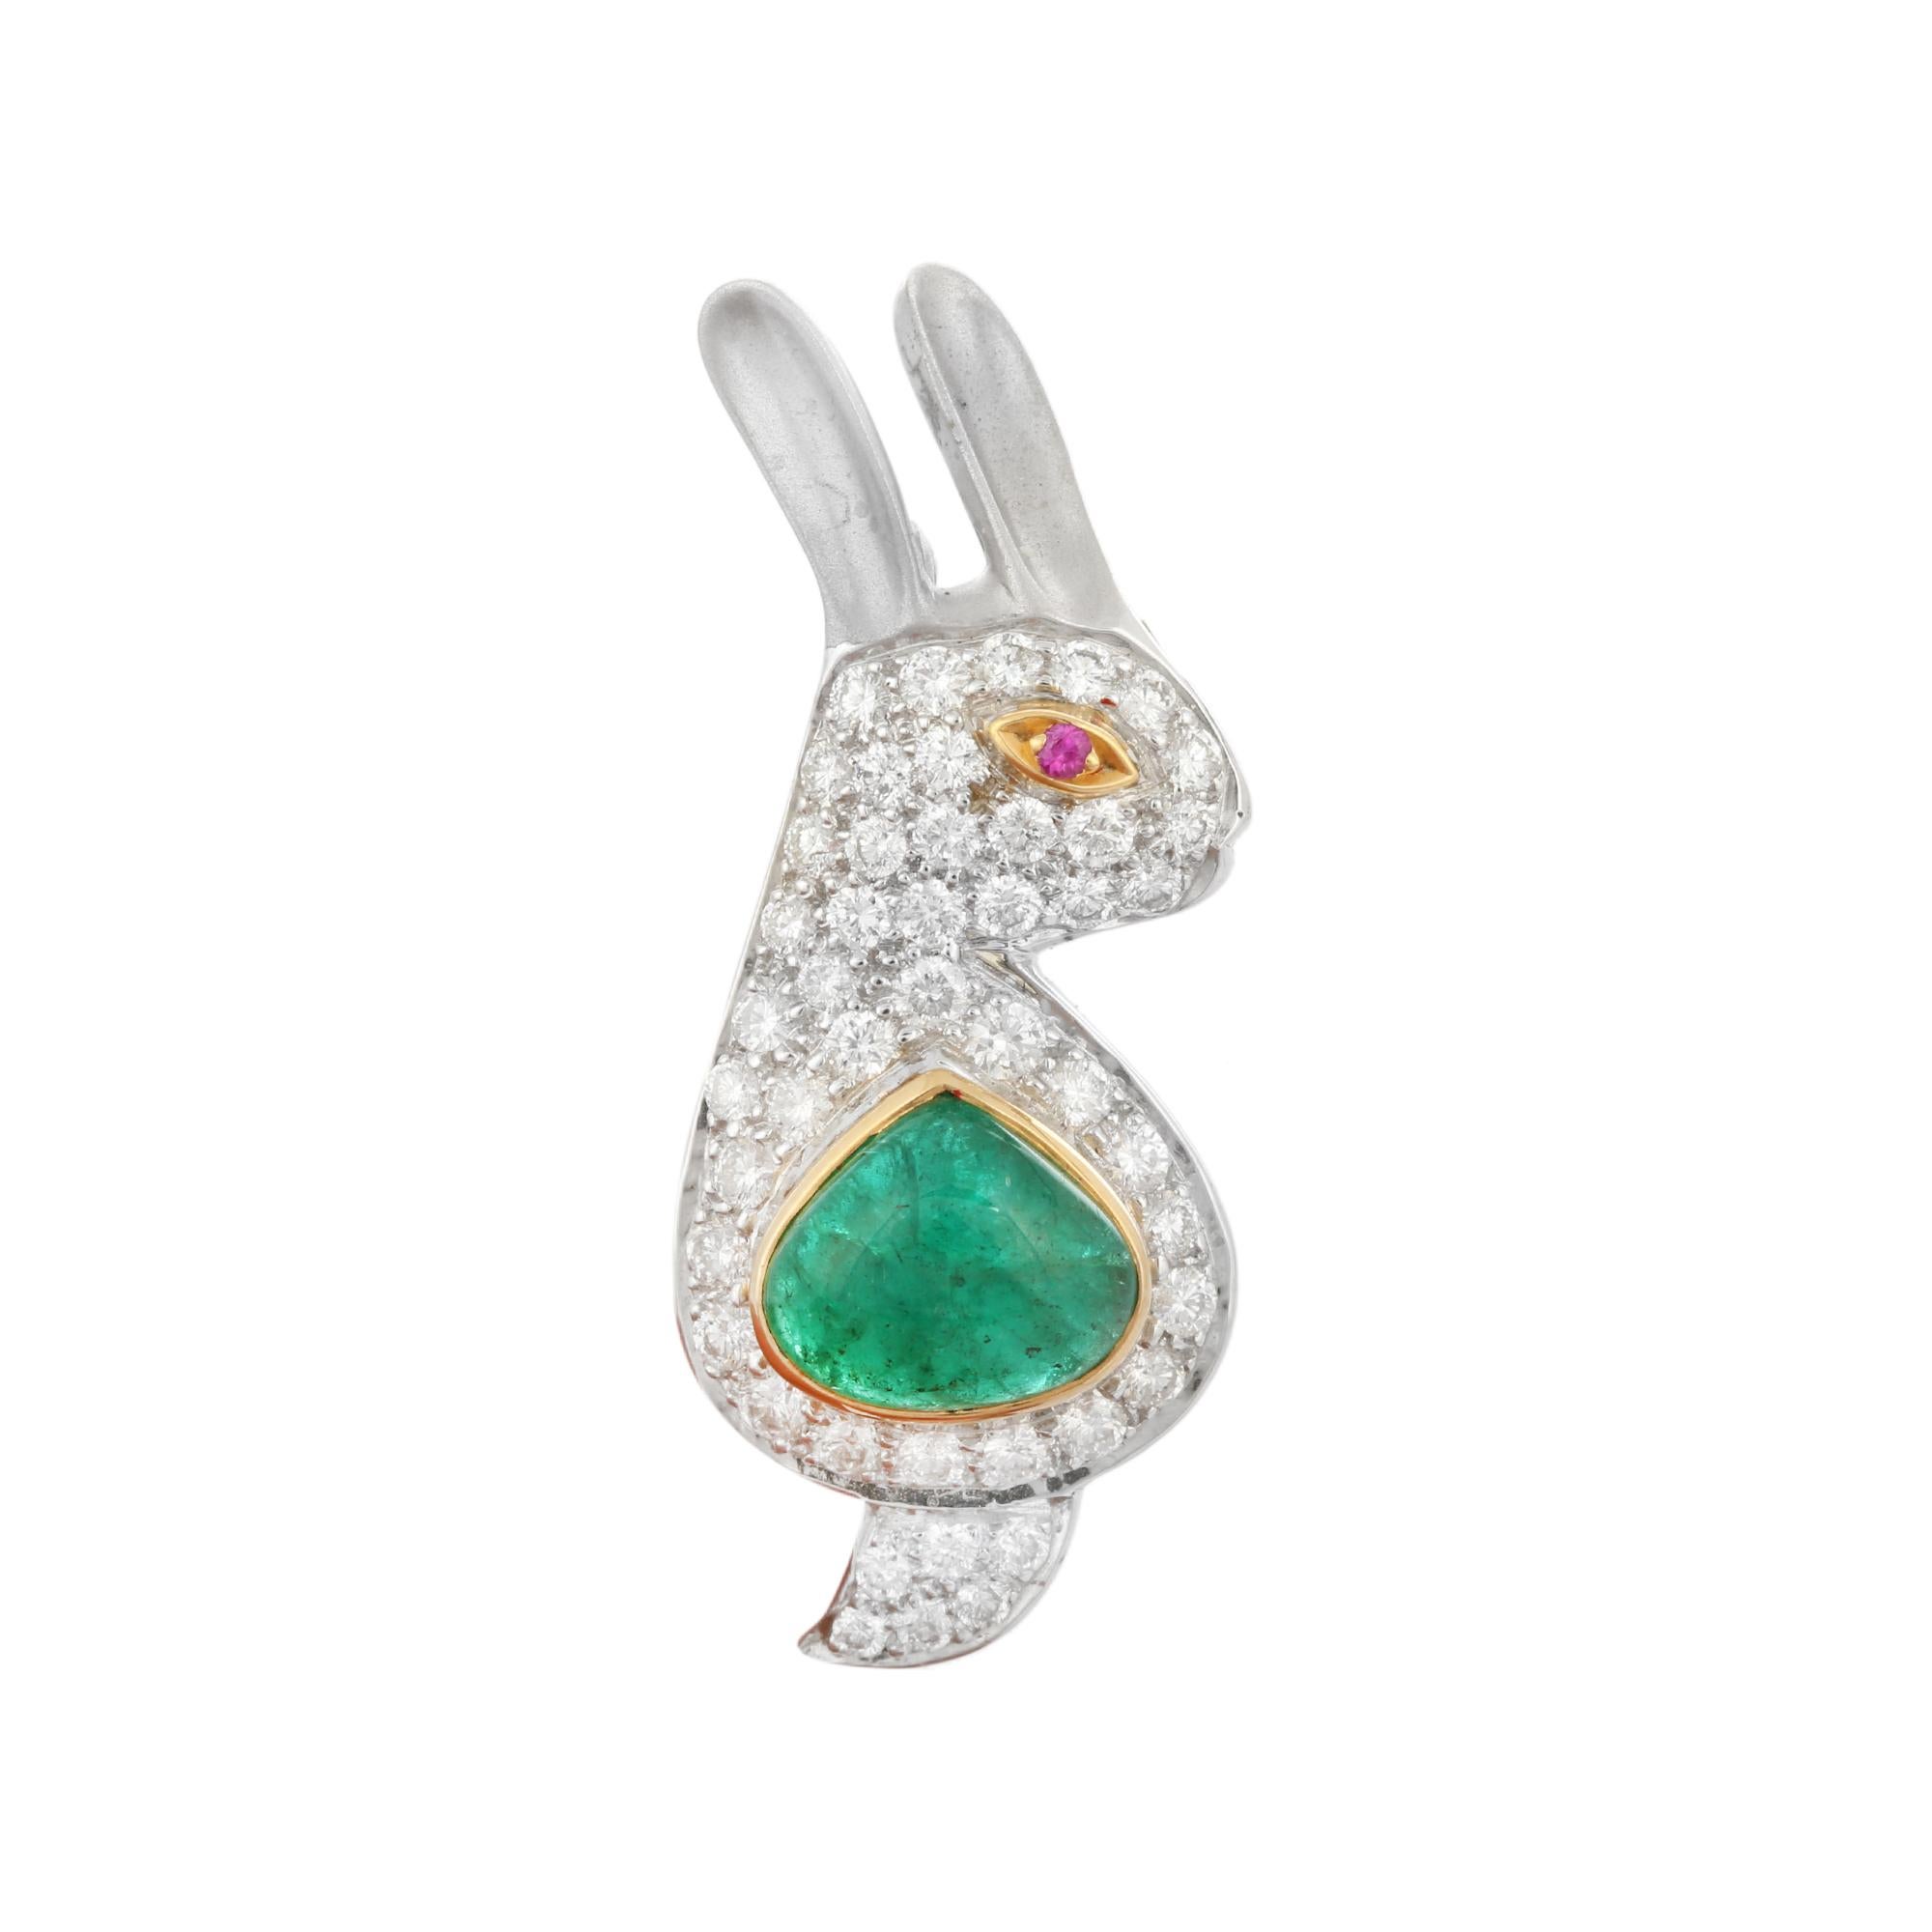 2.2 Carat Emerald Diamond Rabbit Brooch in 18k Solid White Gold, Unisex Gifts In New Condition For Sale In Houston, TX